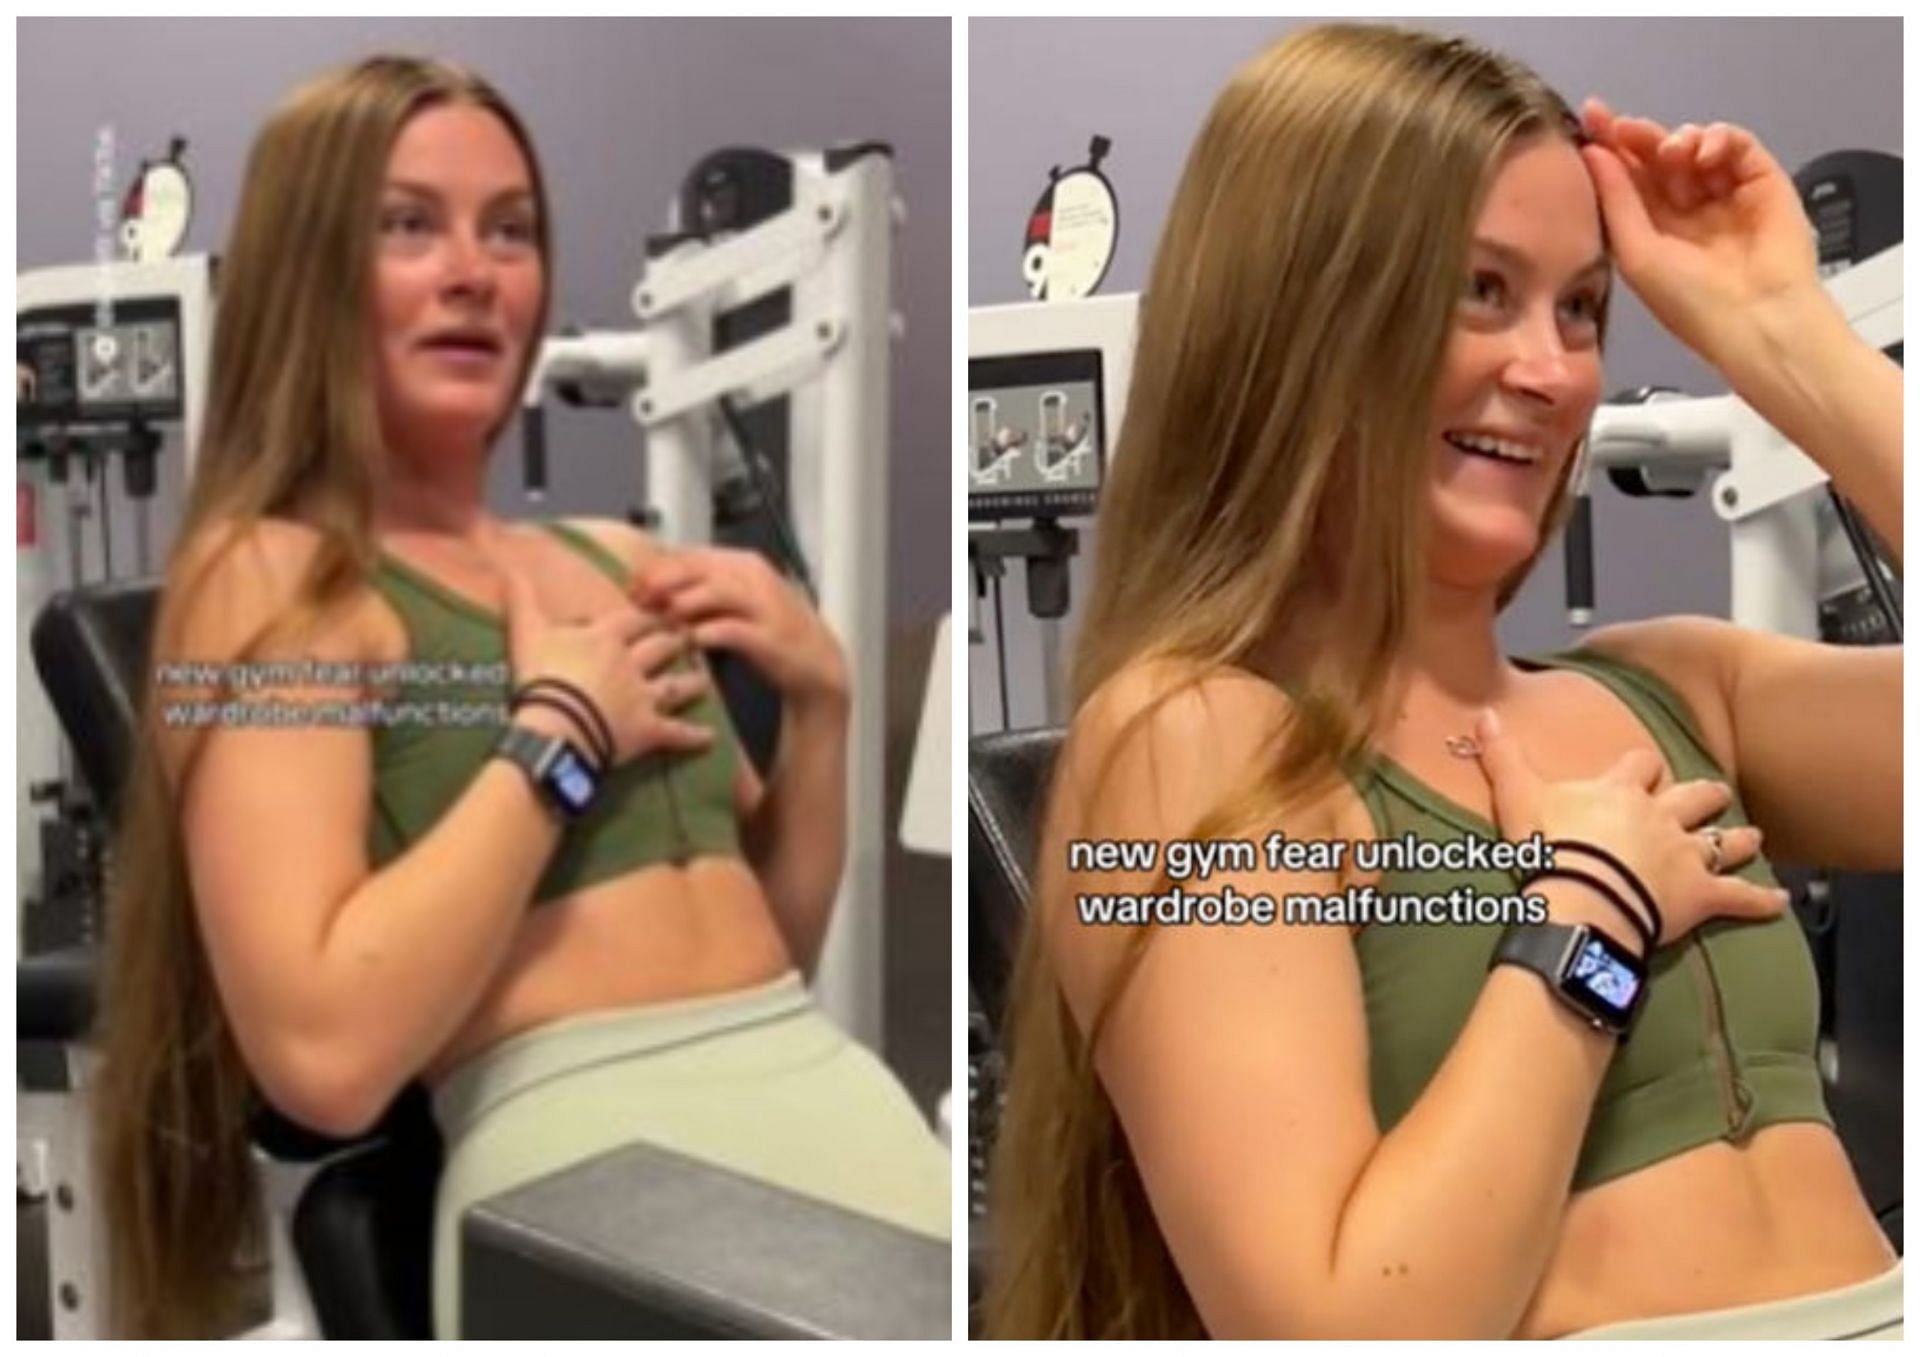 Woman's gym outfit goes viral and unleashes huge debate